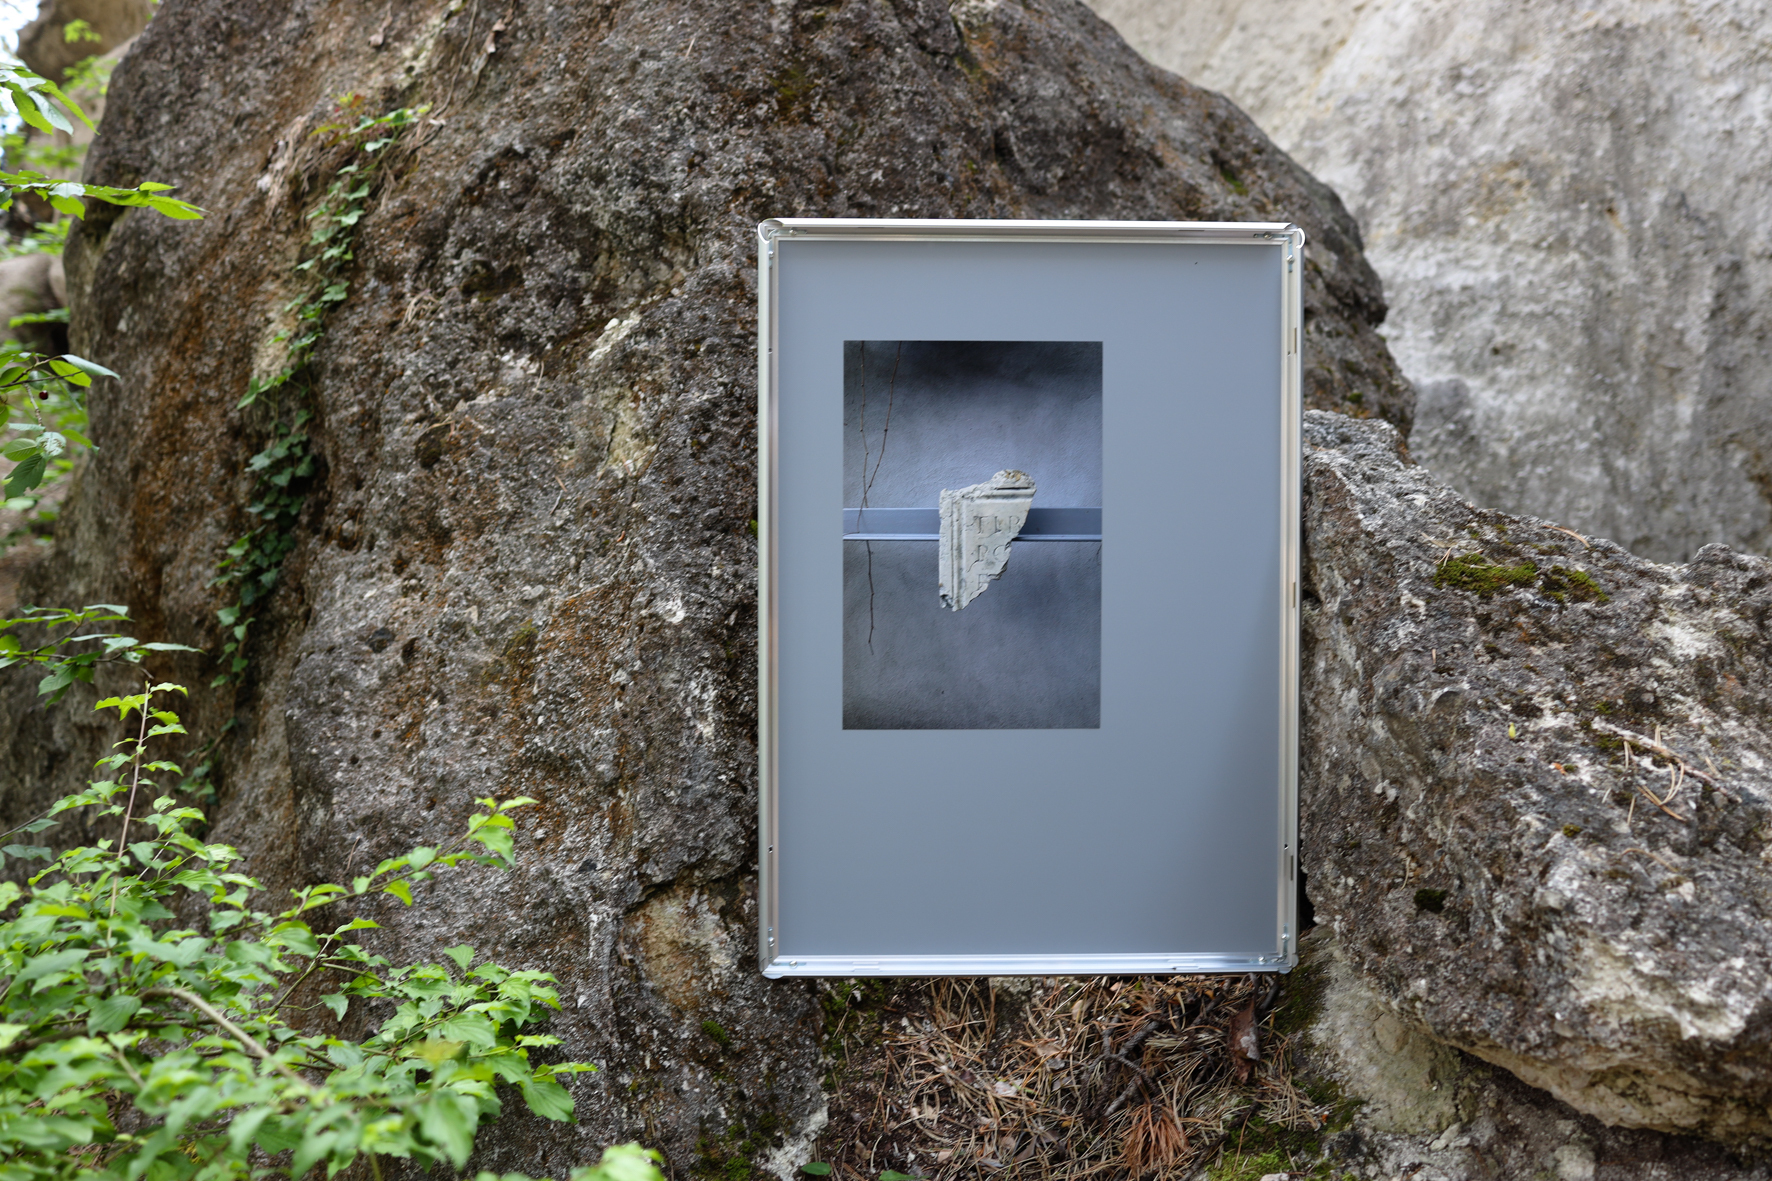 Bianca Pedrina, Shhh - Just be a rock, 2022, Aluminium Snap Frames, Prints on Fujicolor Archive Paper, 88 x 64cm, installation view outside the cave